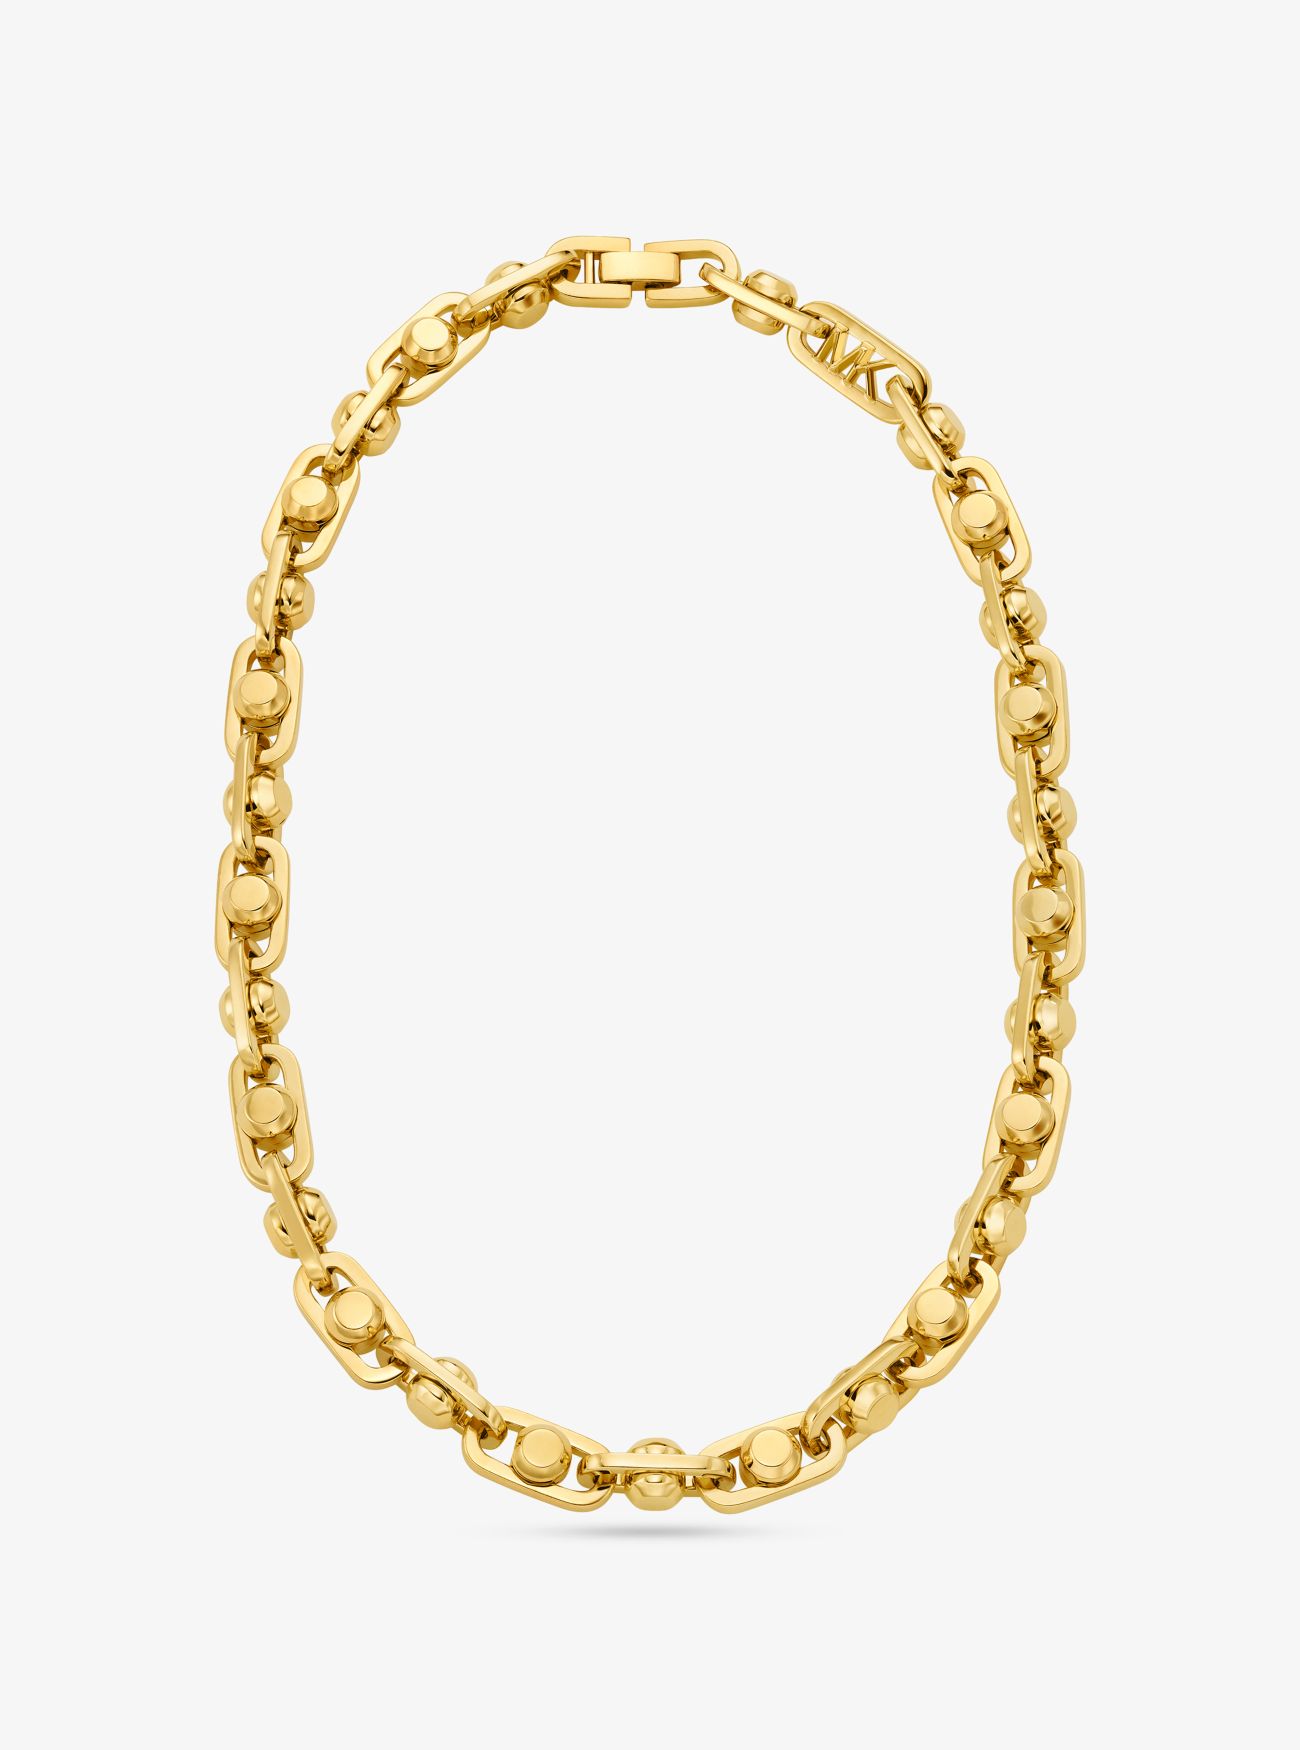 MK Astor Large Precious Metal-Plated Brass Link Necklace - Gold - Michael Kors